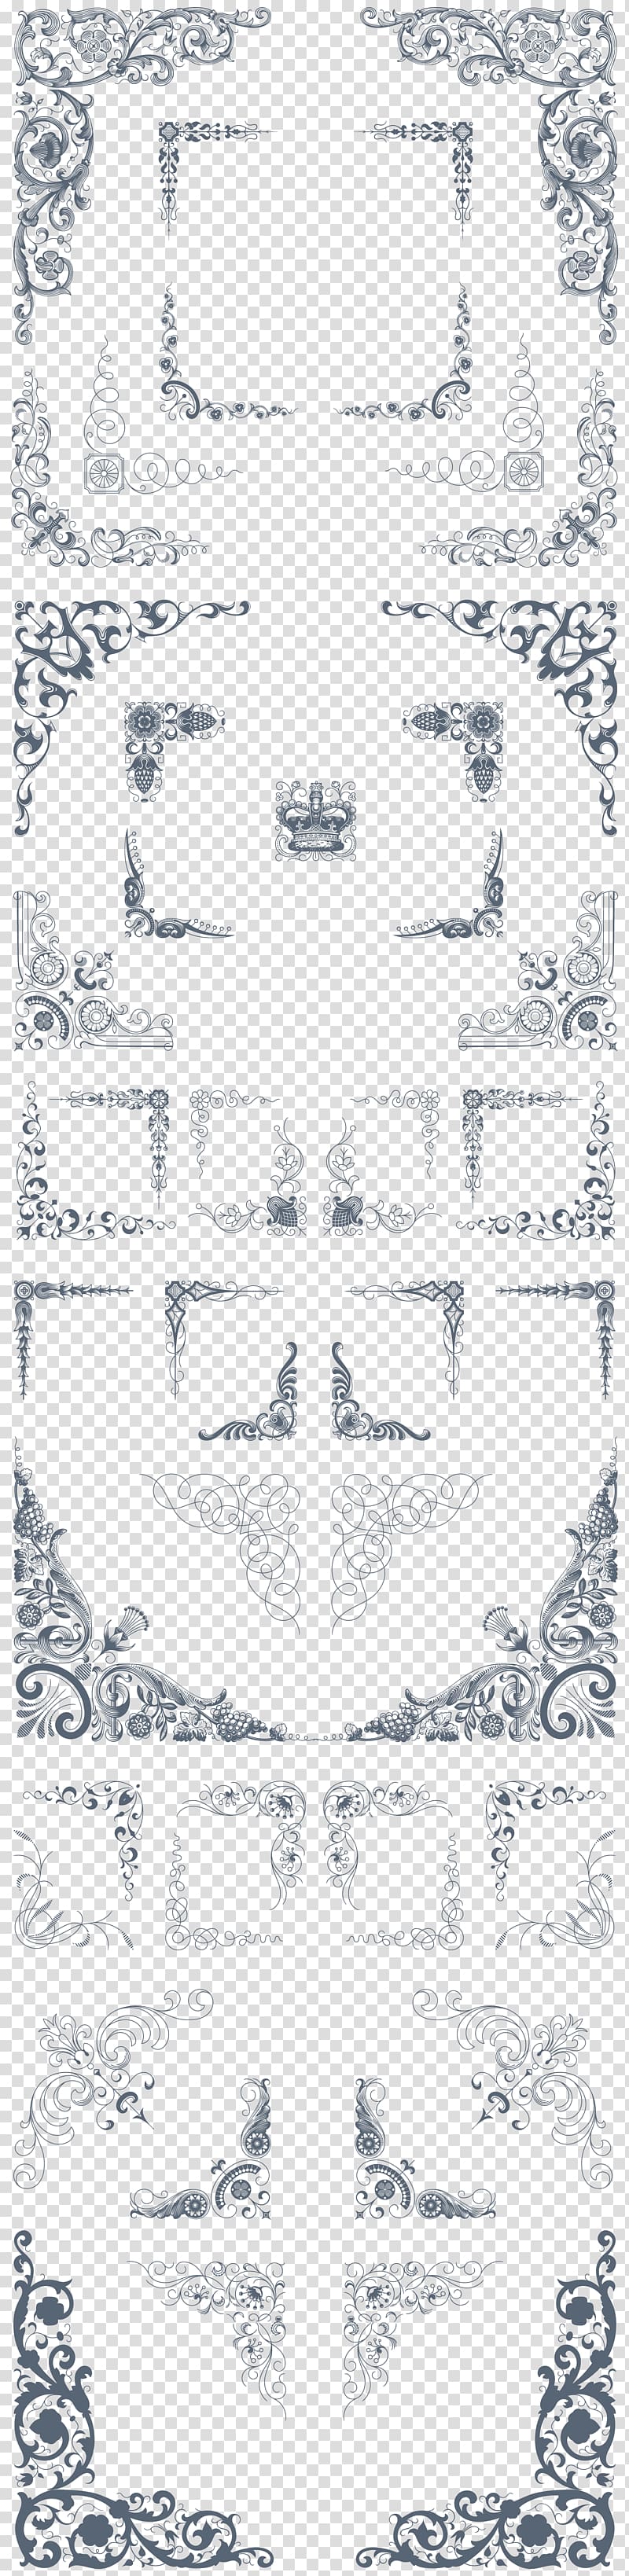 Black and white, light effect decorative frame transparent background PNG clipart